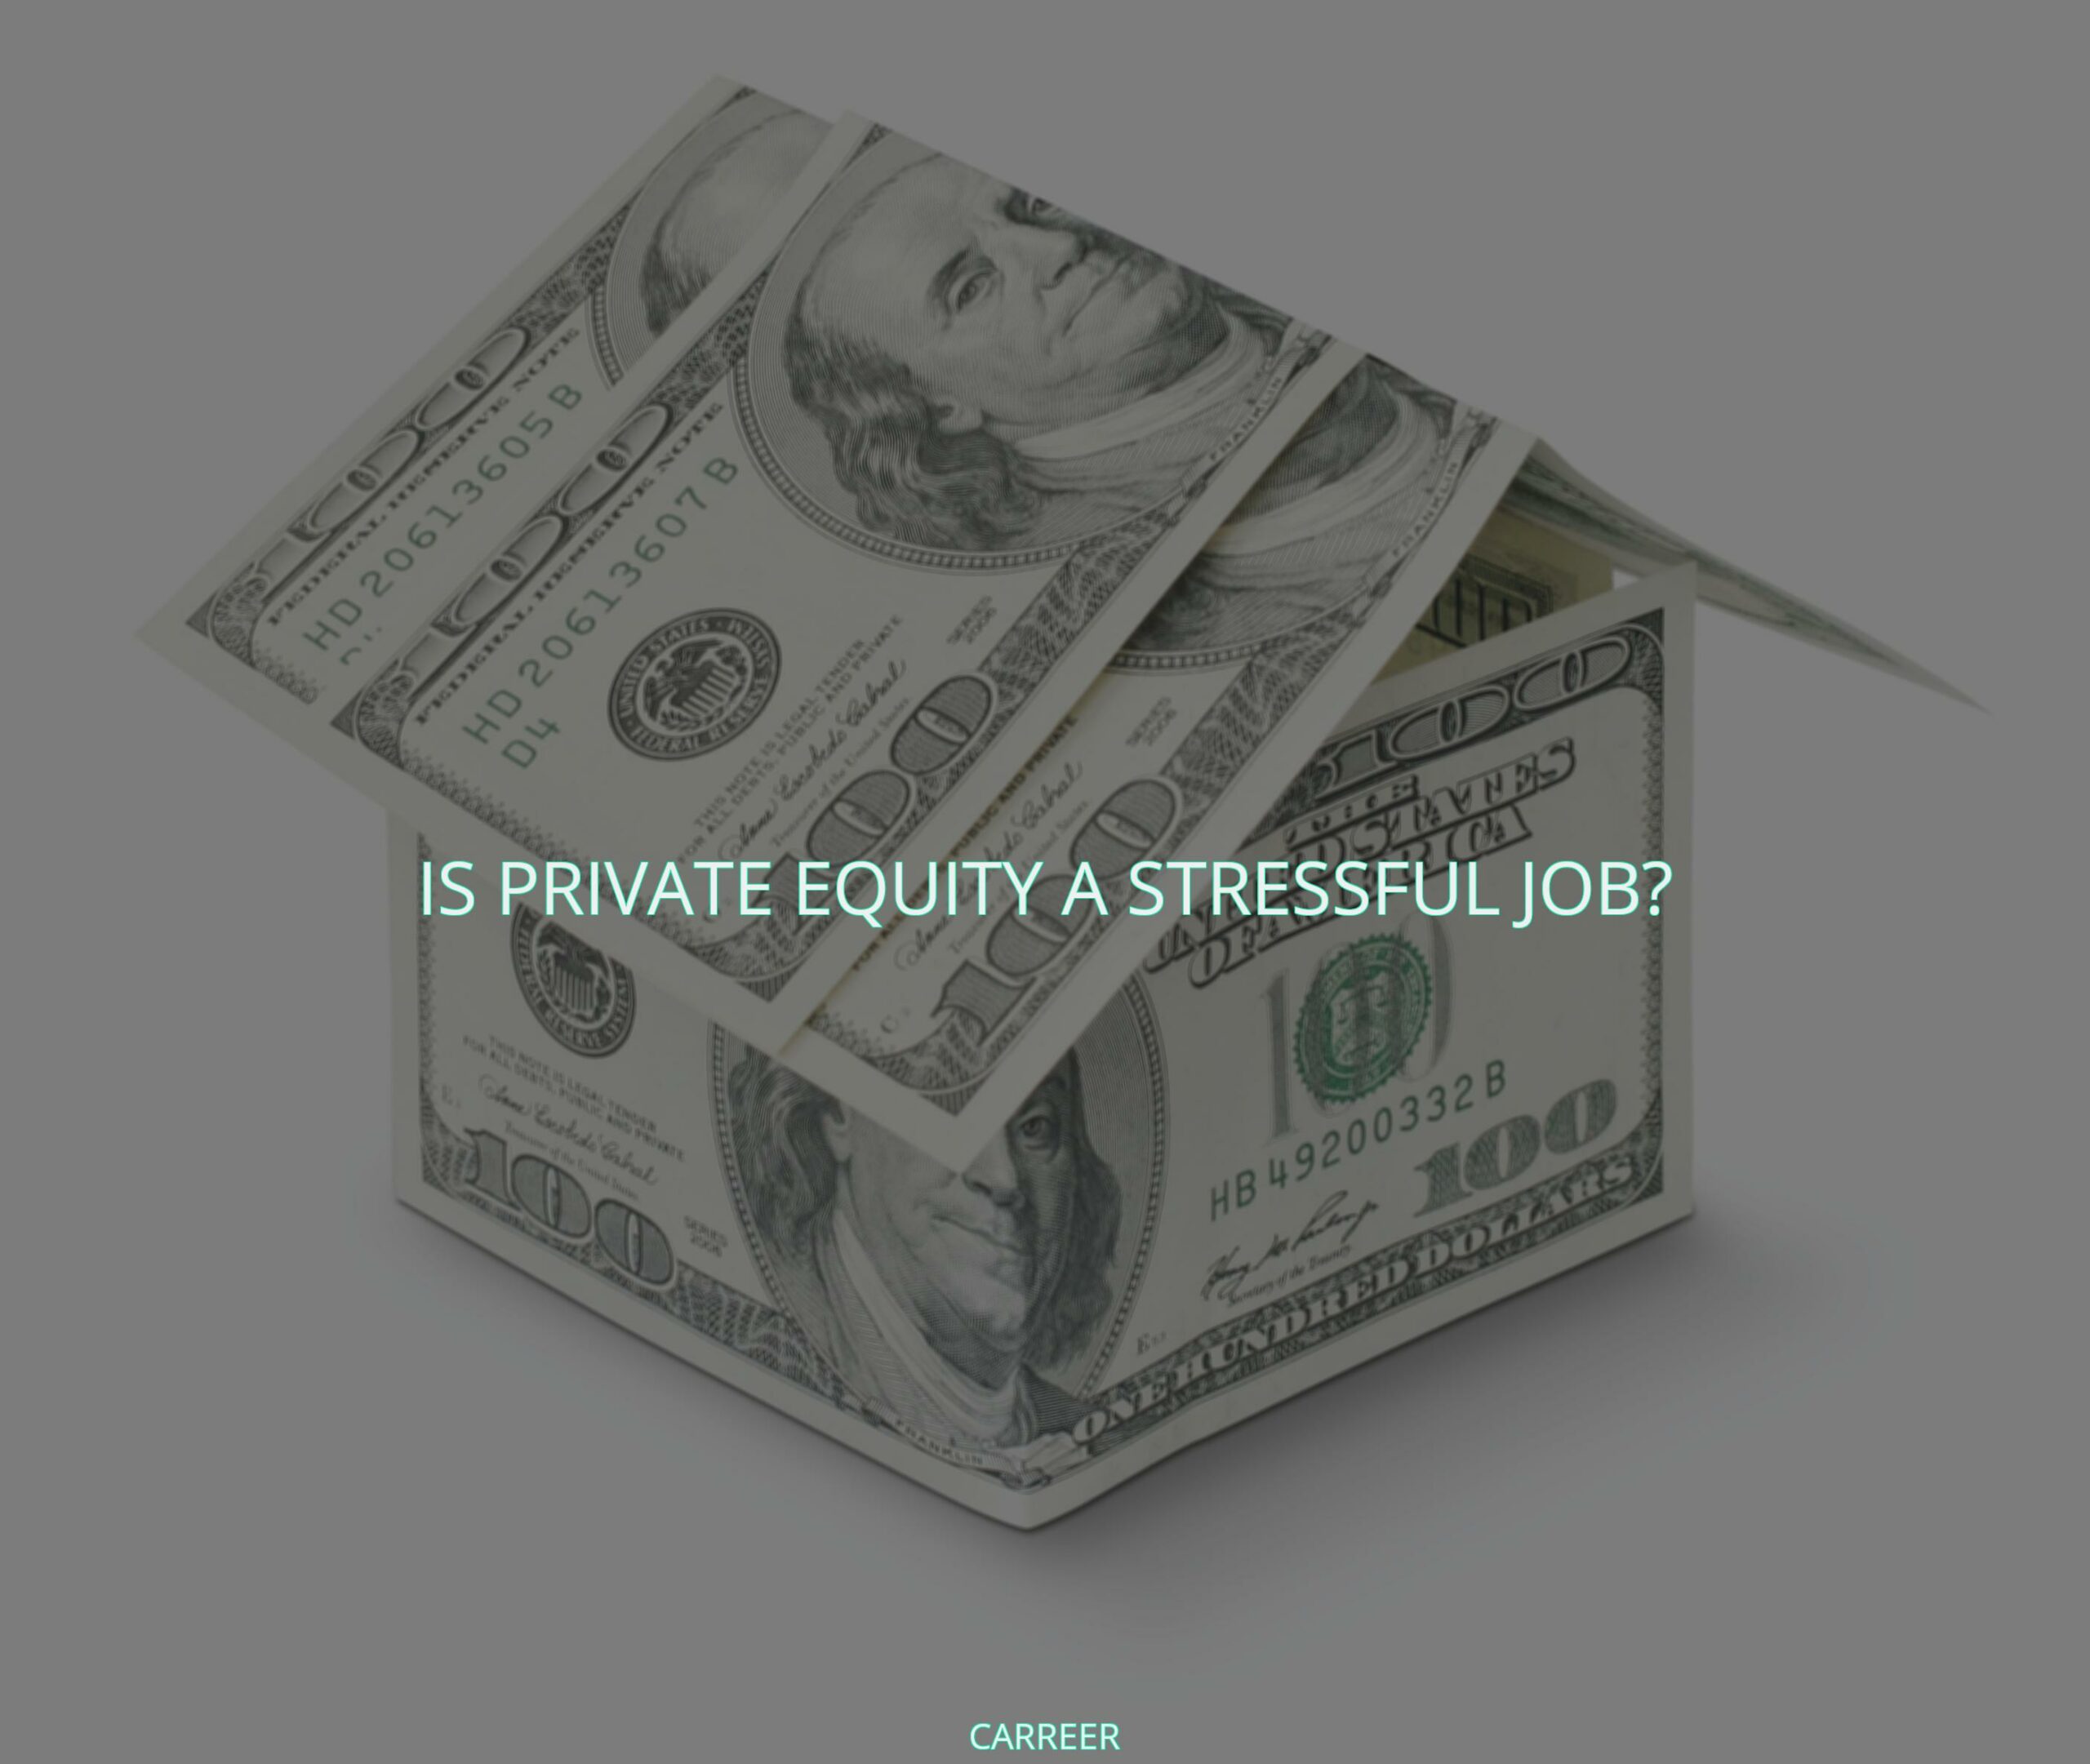 Is private equity a stressful job?